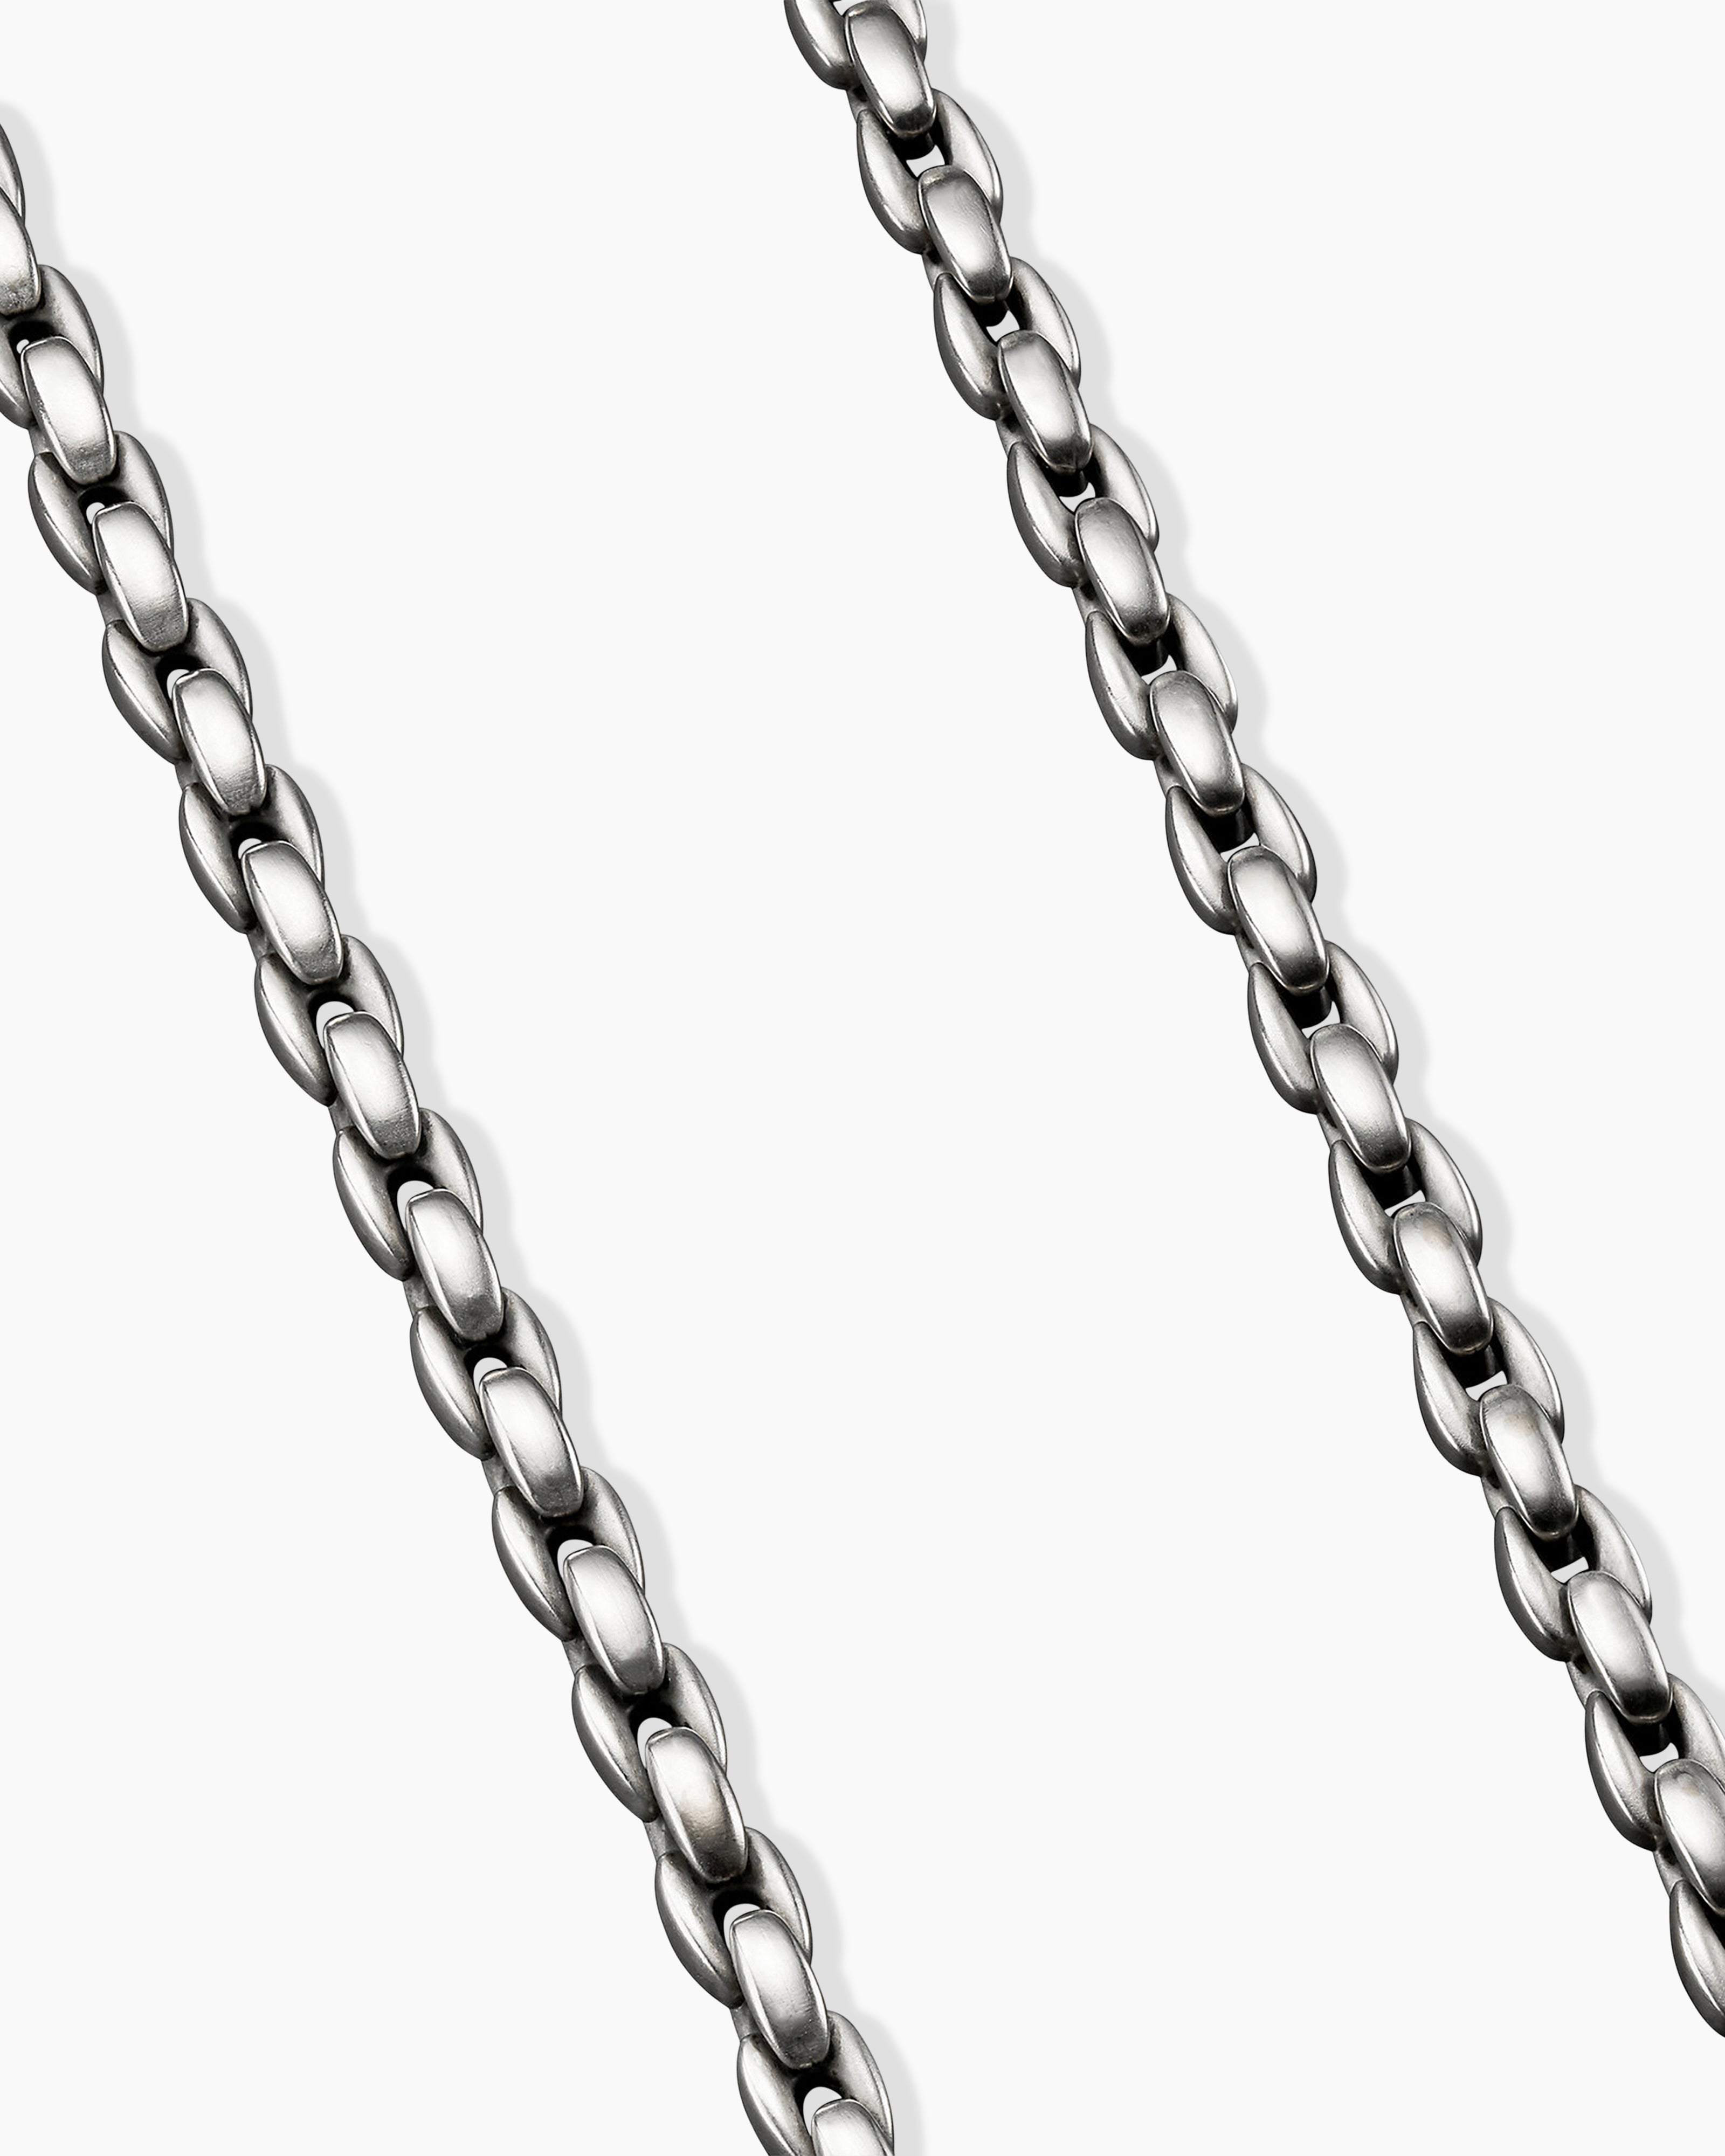 David Yurman Men's Box Chain Necklace in Stainless Steel and Sterling Silver, 7.3mm - Black - Size 22